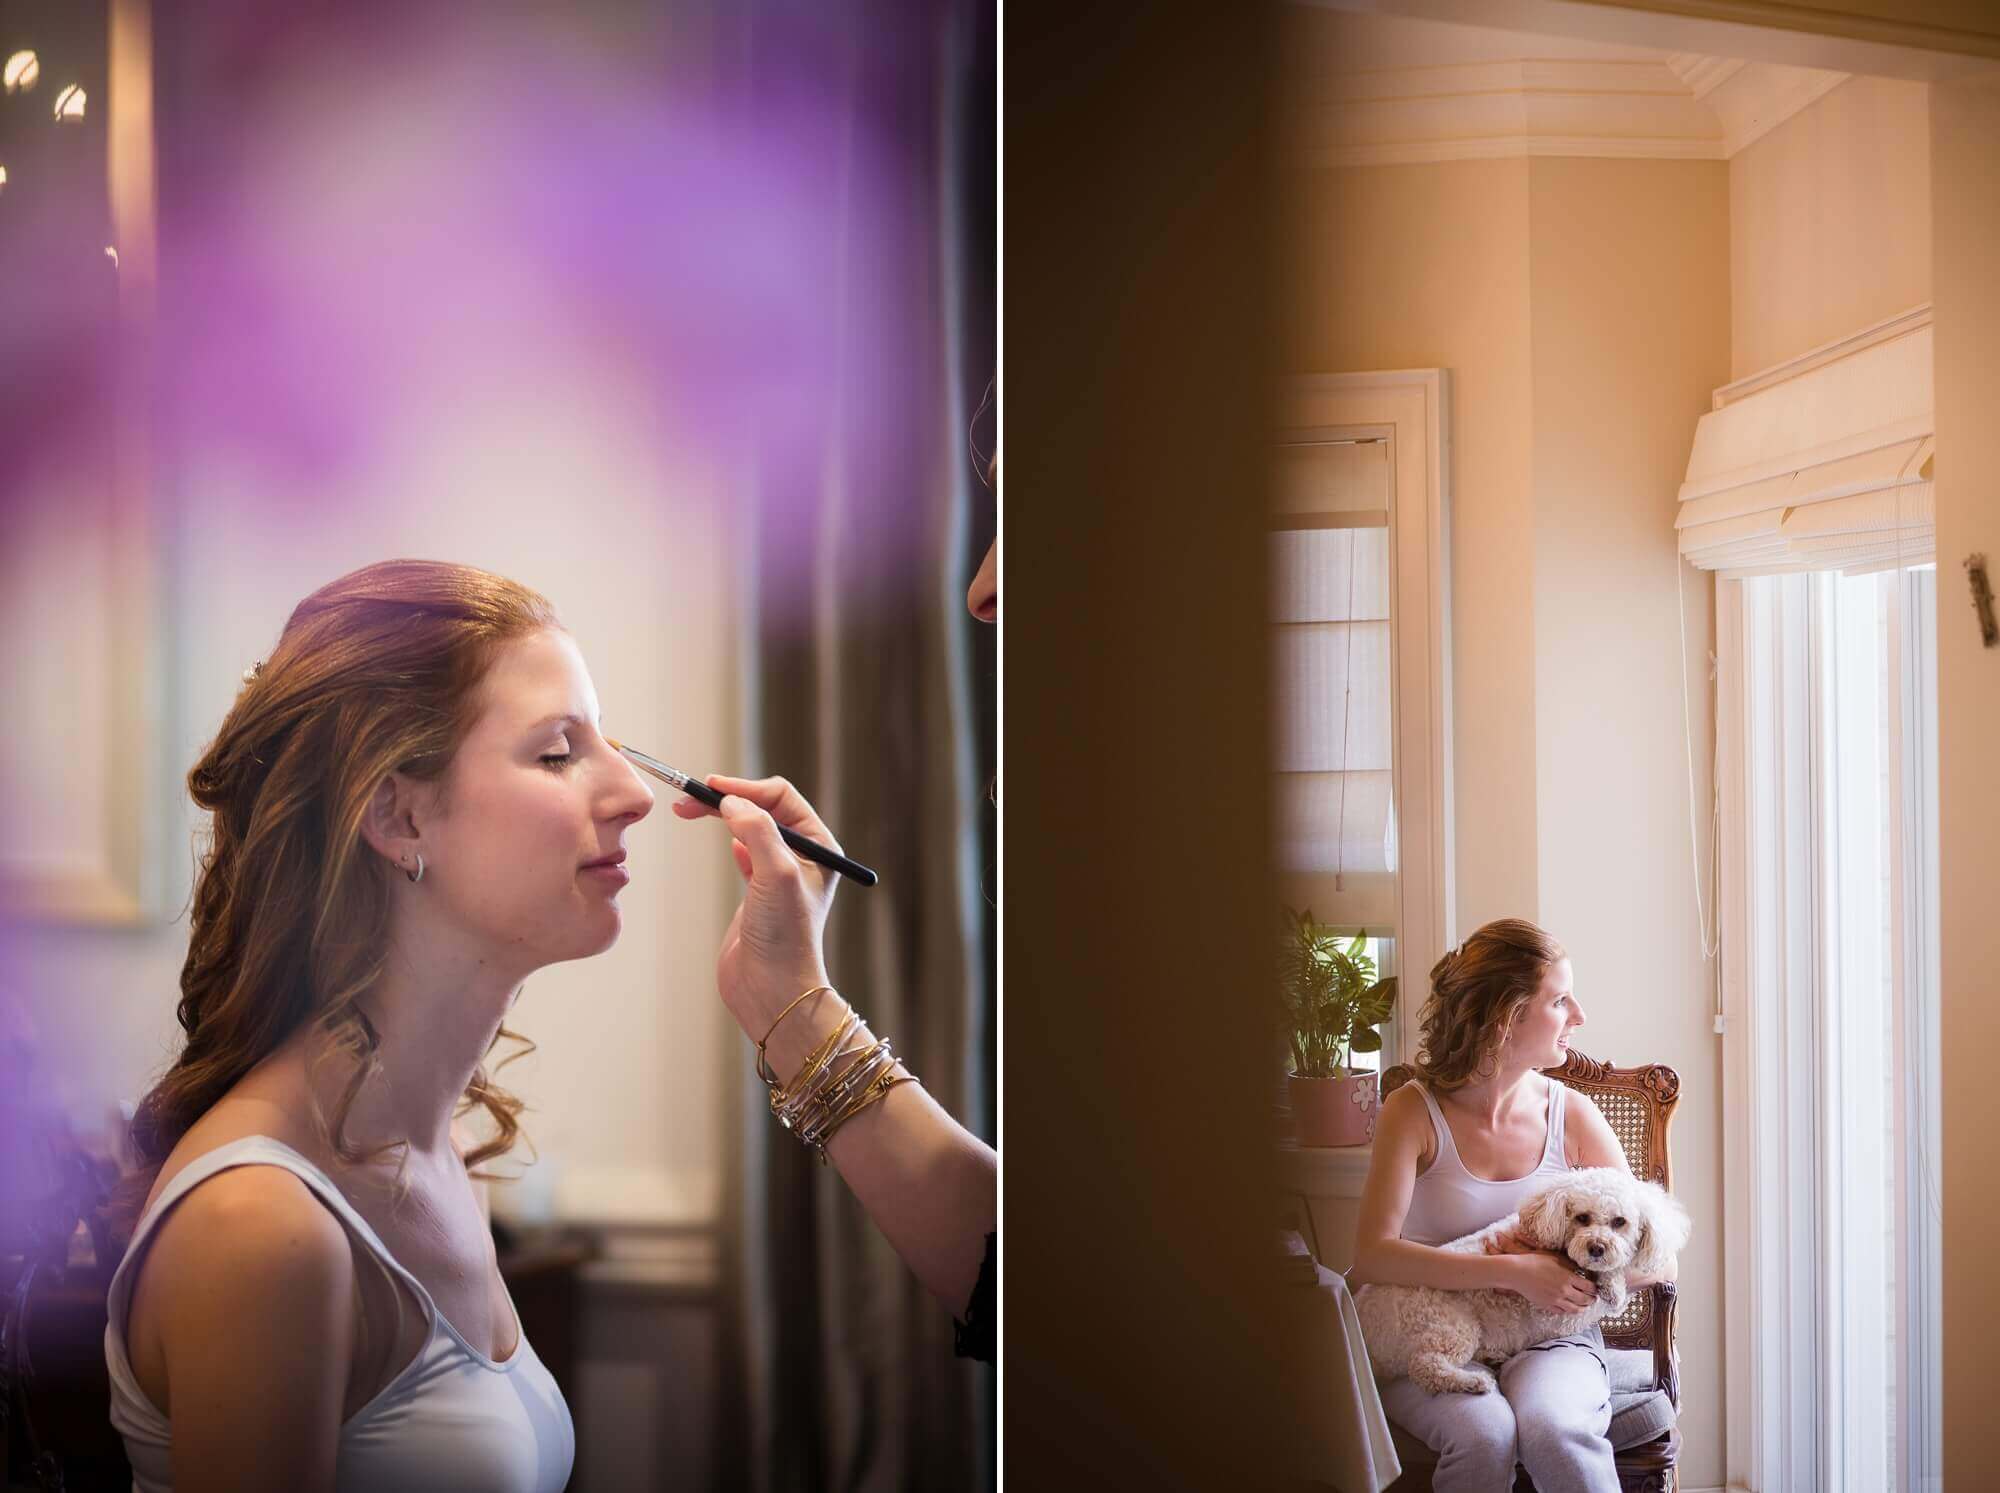 Getting ready photos of the bride having her makeup done, and sitting at a window with her dog.